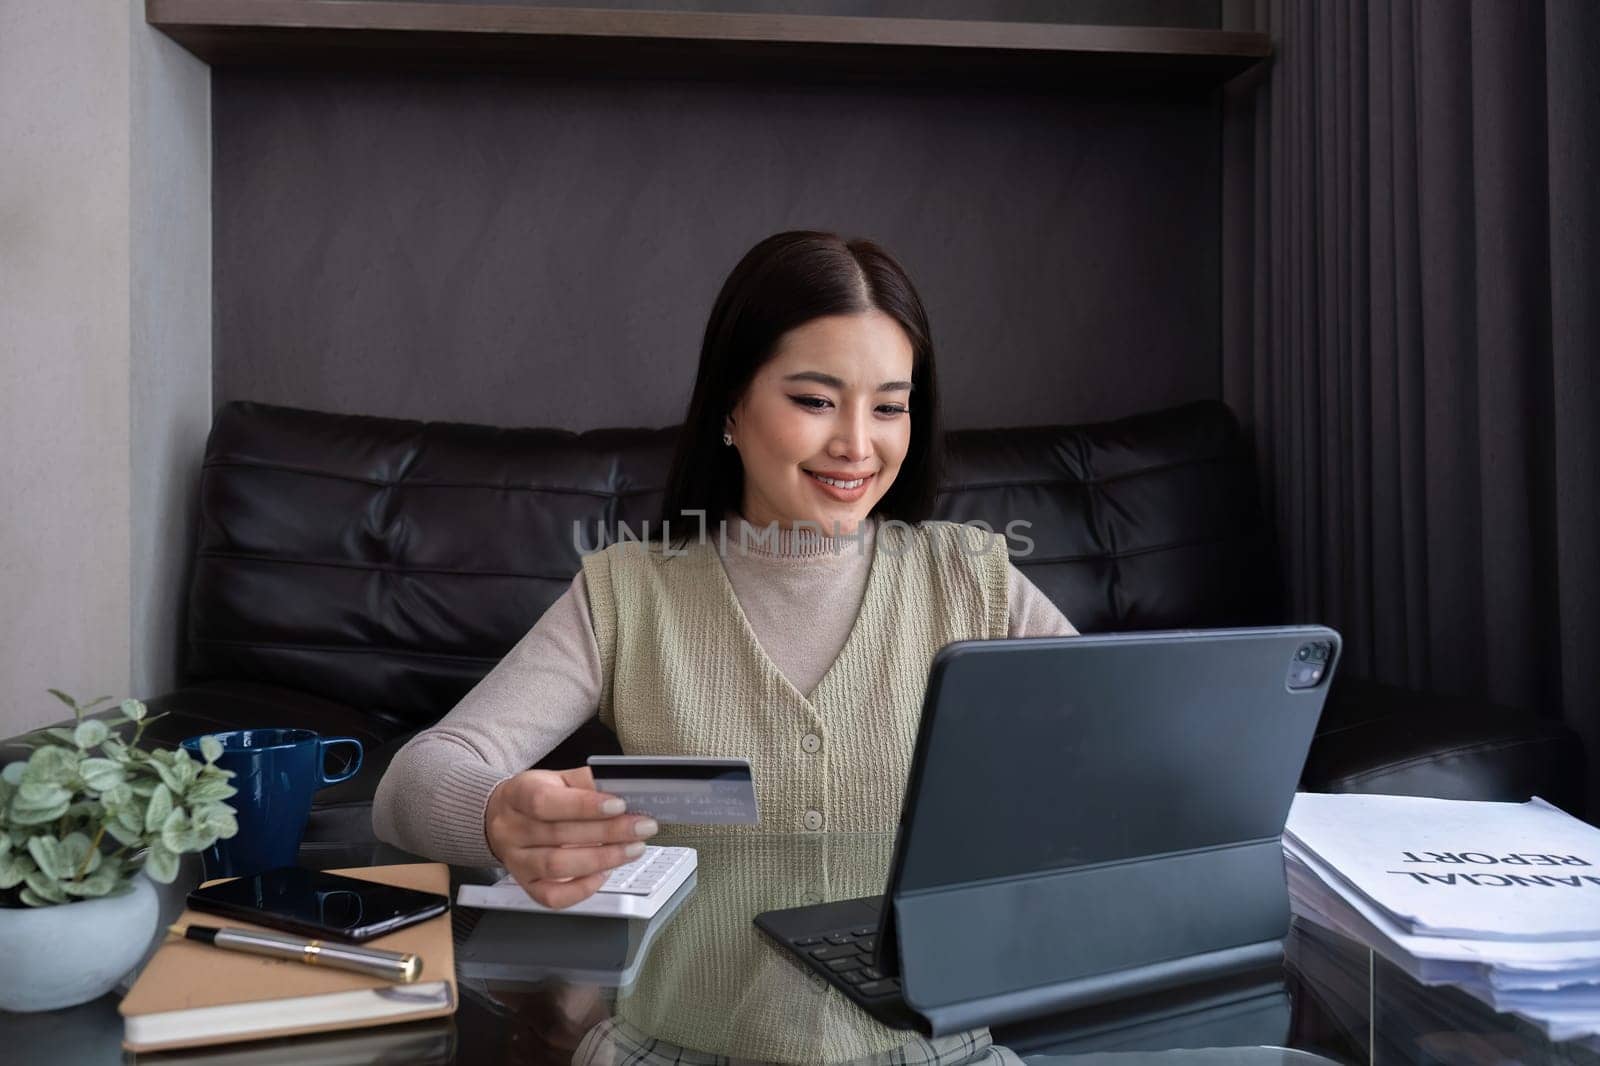 Beautiful young woman uses laptop to shop online Buy things from home and pay by credit card through the online banking app by phone.